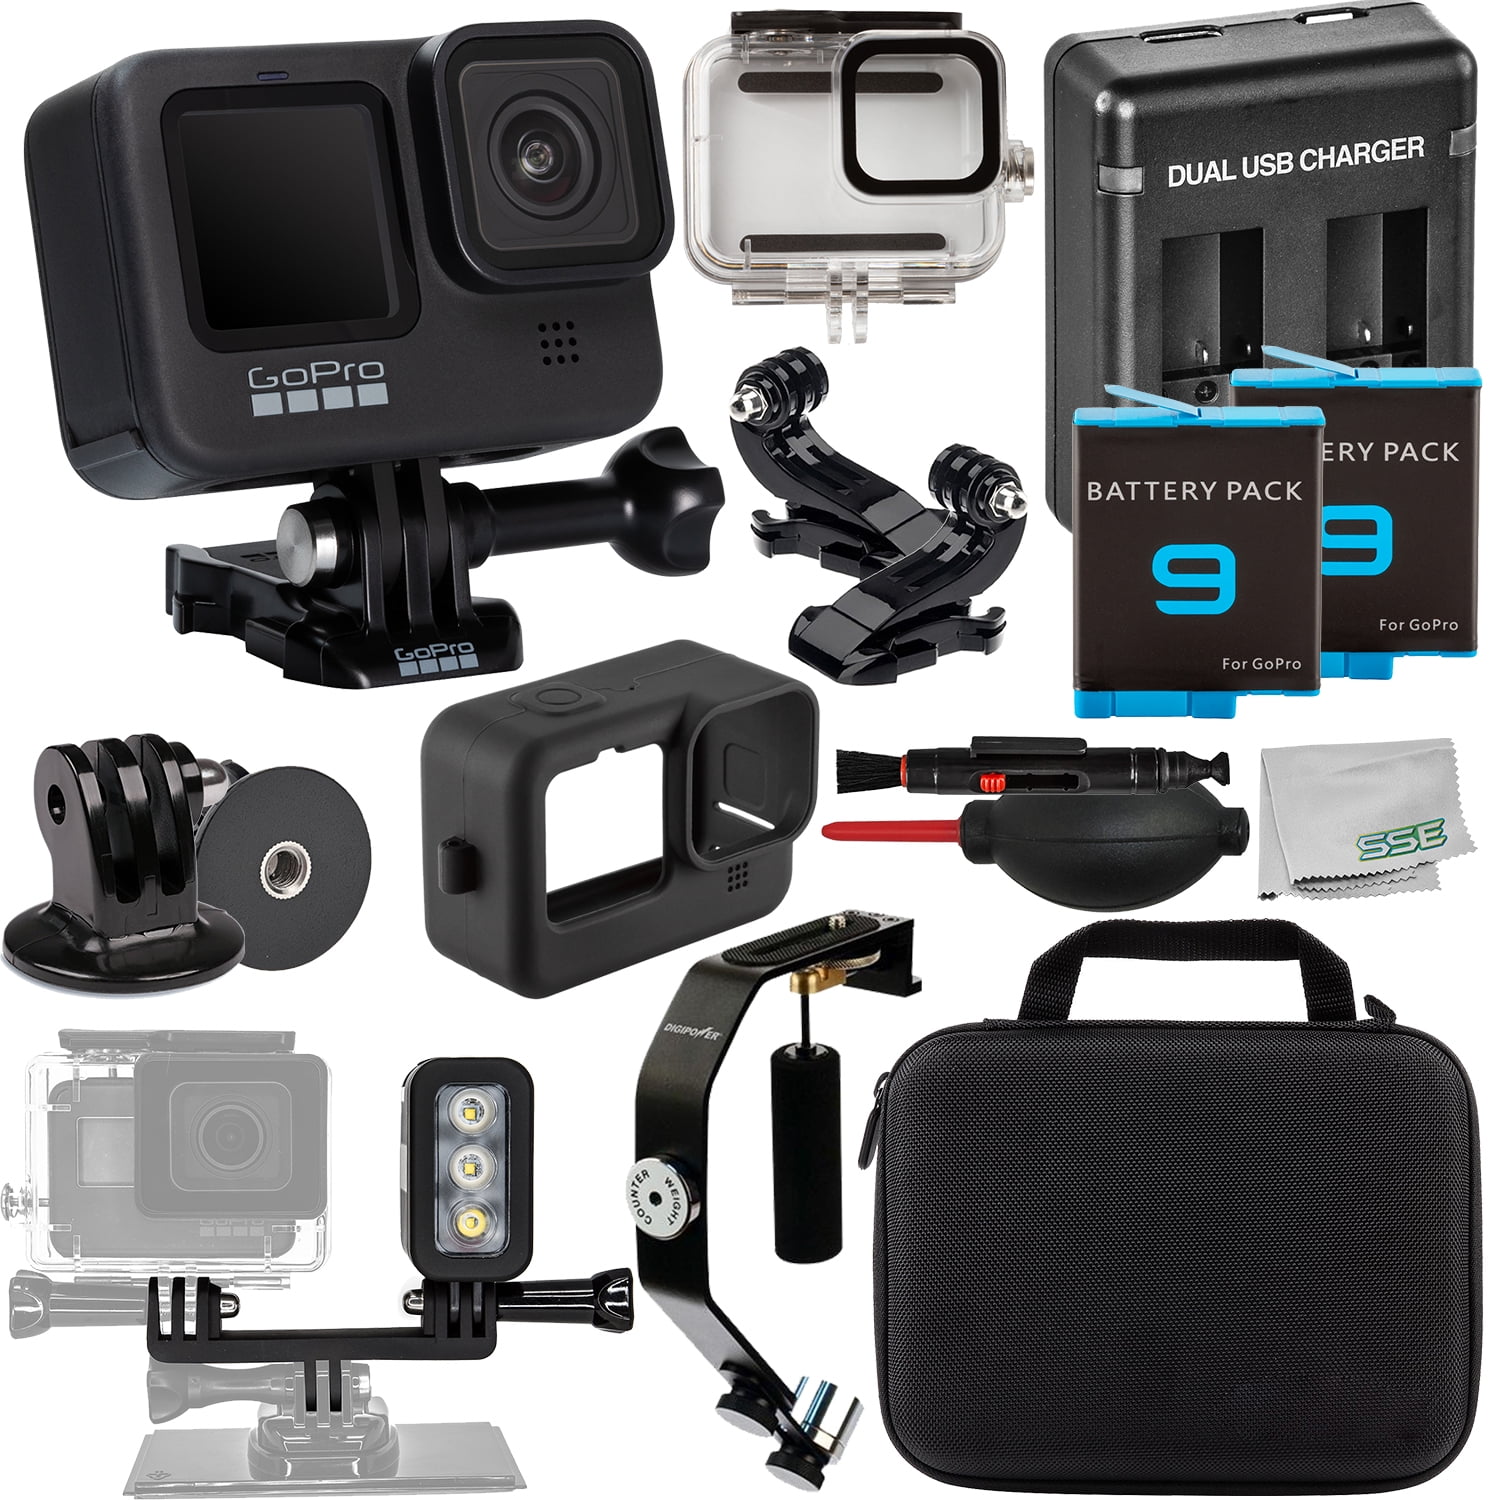 HERO8 Black HERO8 Silver Hero 8 HD Silver Kastar 1 Pack Battery and LCD Triple USB Charger Compatible with Gopro Hero 8 Action Camera HERO7 Black Hero 7 Action Camera Hero 8 HD Black